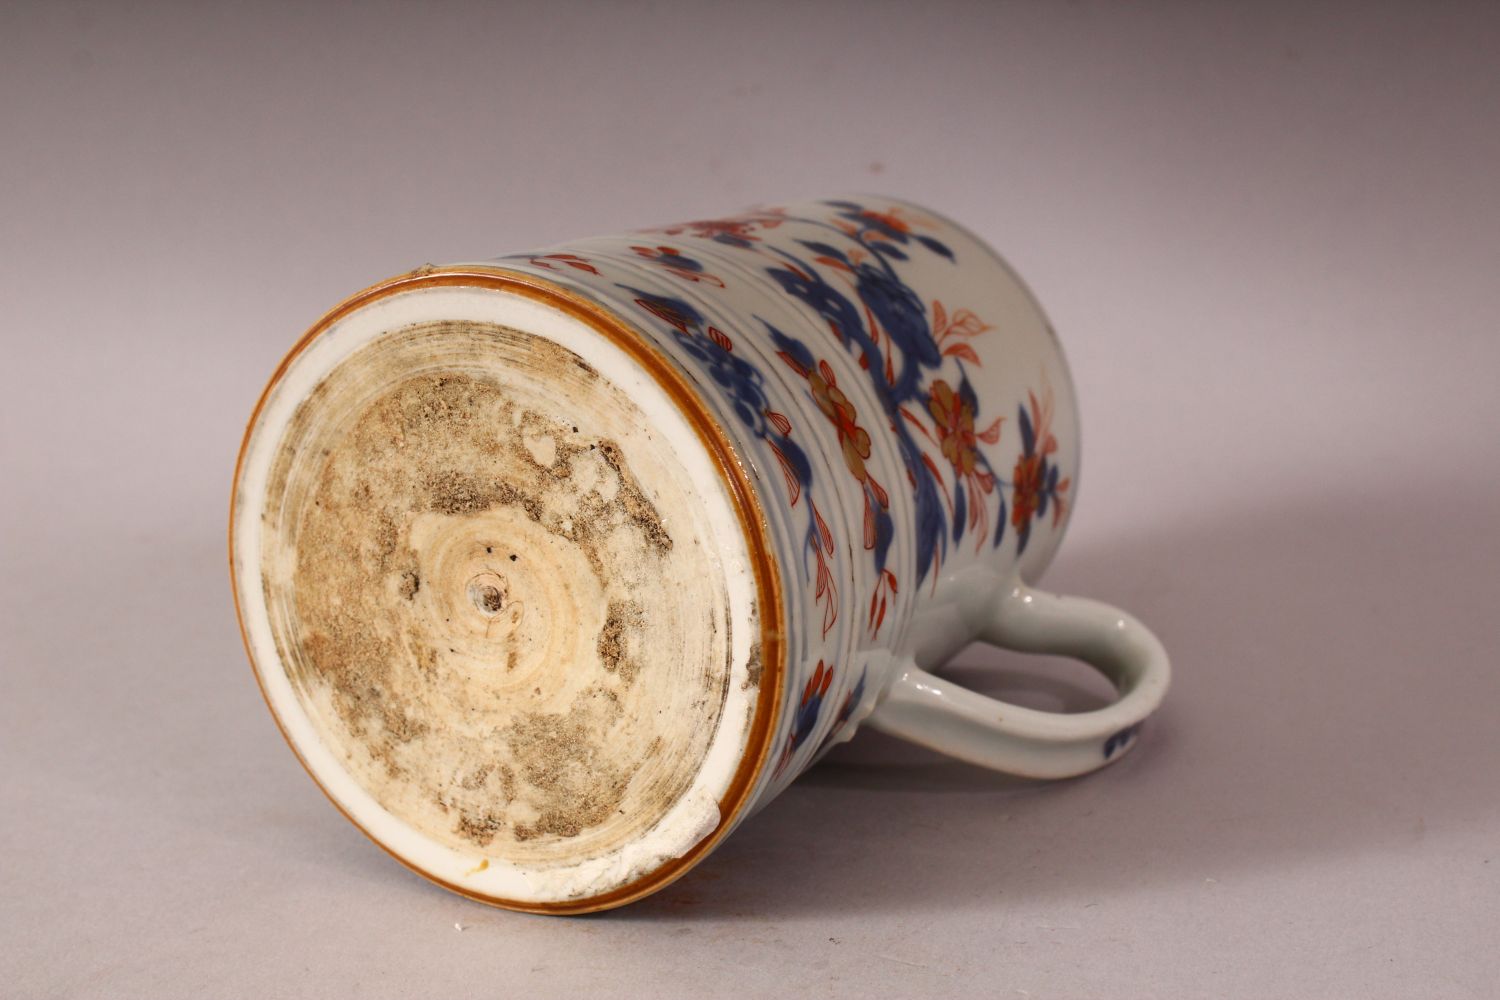 AN 18TH CENTURY CHINESE IMARI PORCELAIN TANKARD - decorated with underglaze blue and orange floral - Image 5 of 5